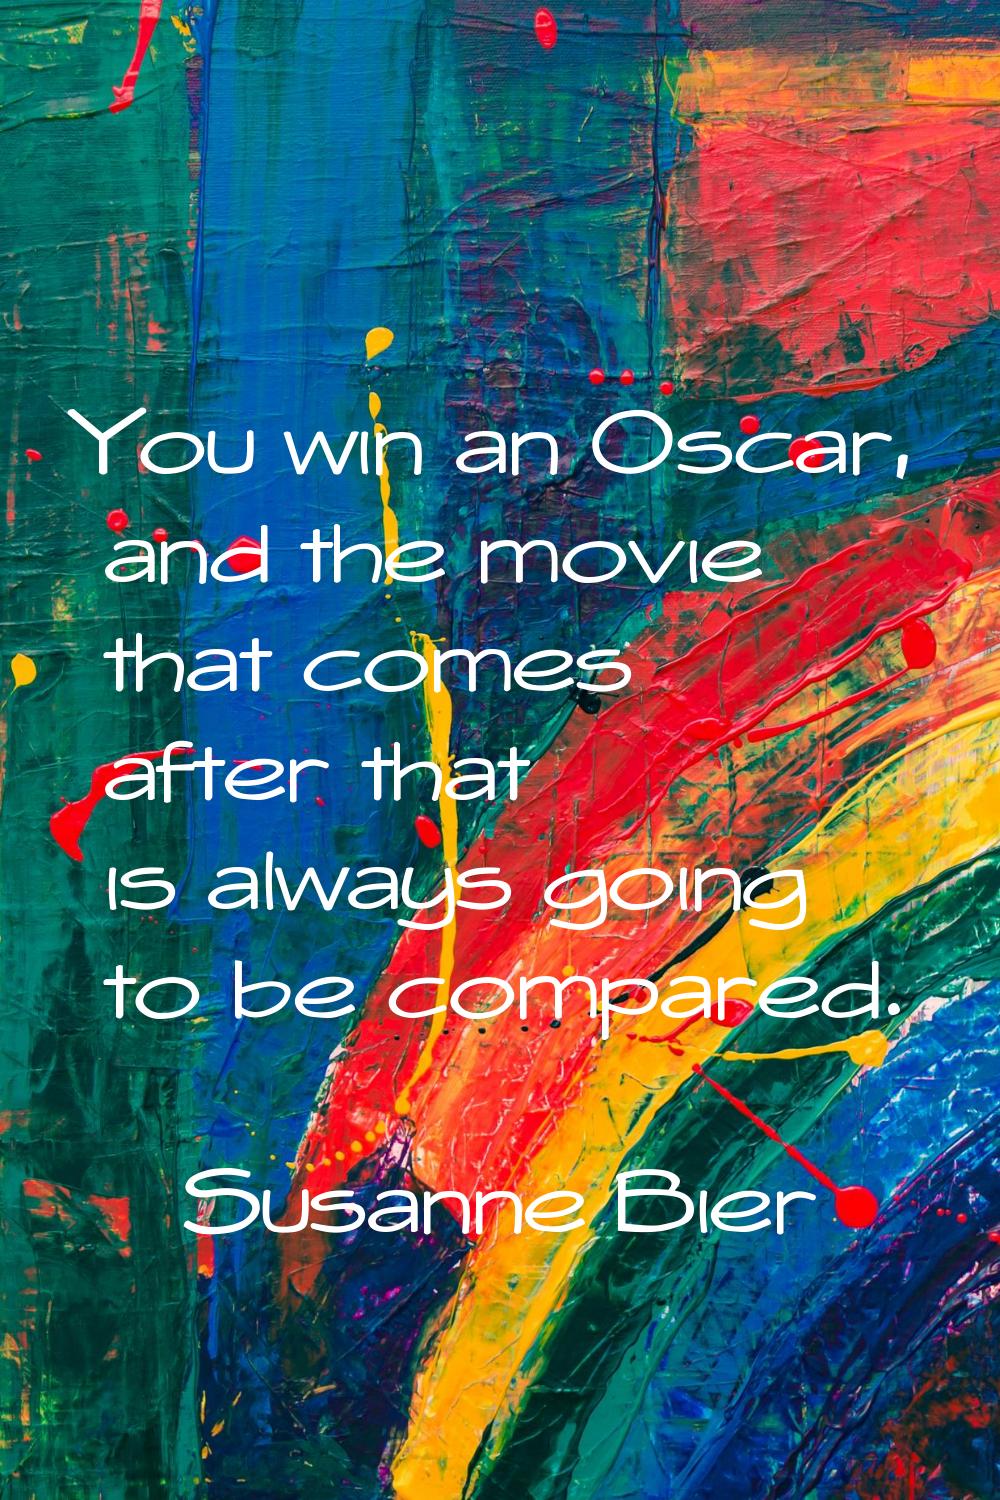 You win an Oscar, and the movie that comes after that is always going to be compared.